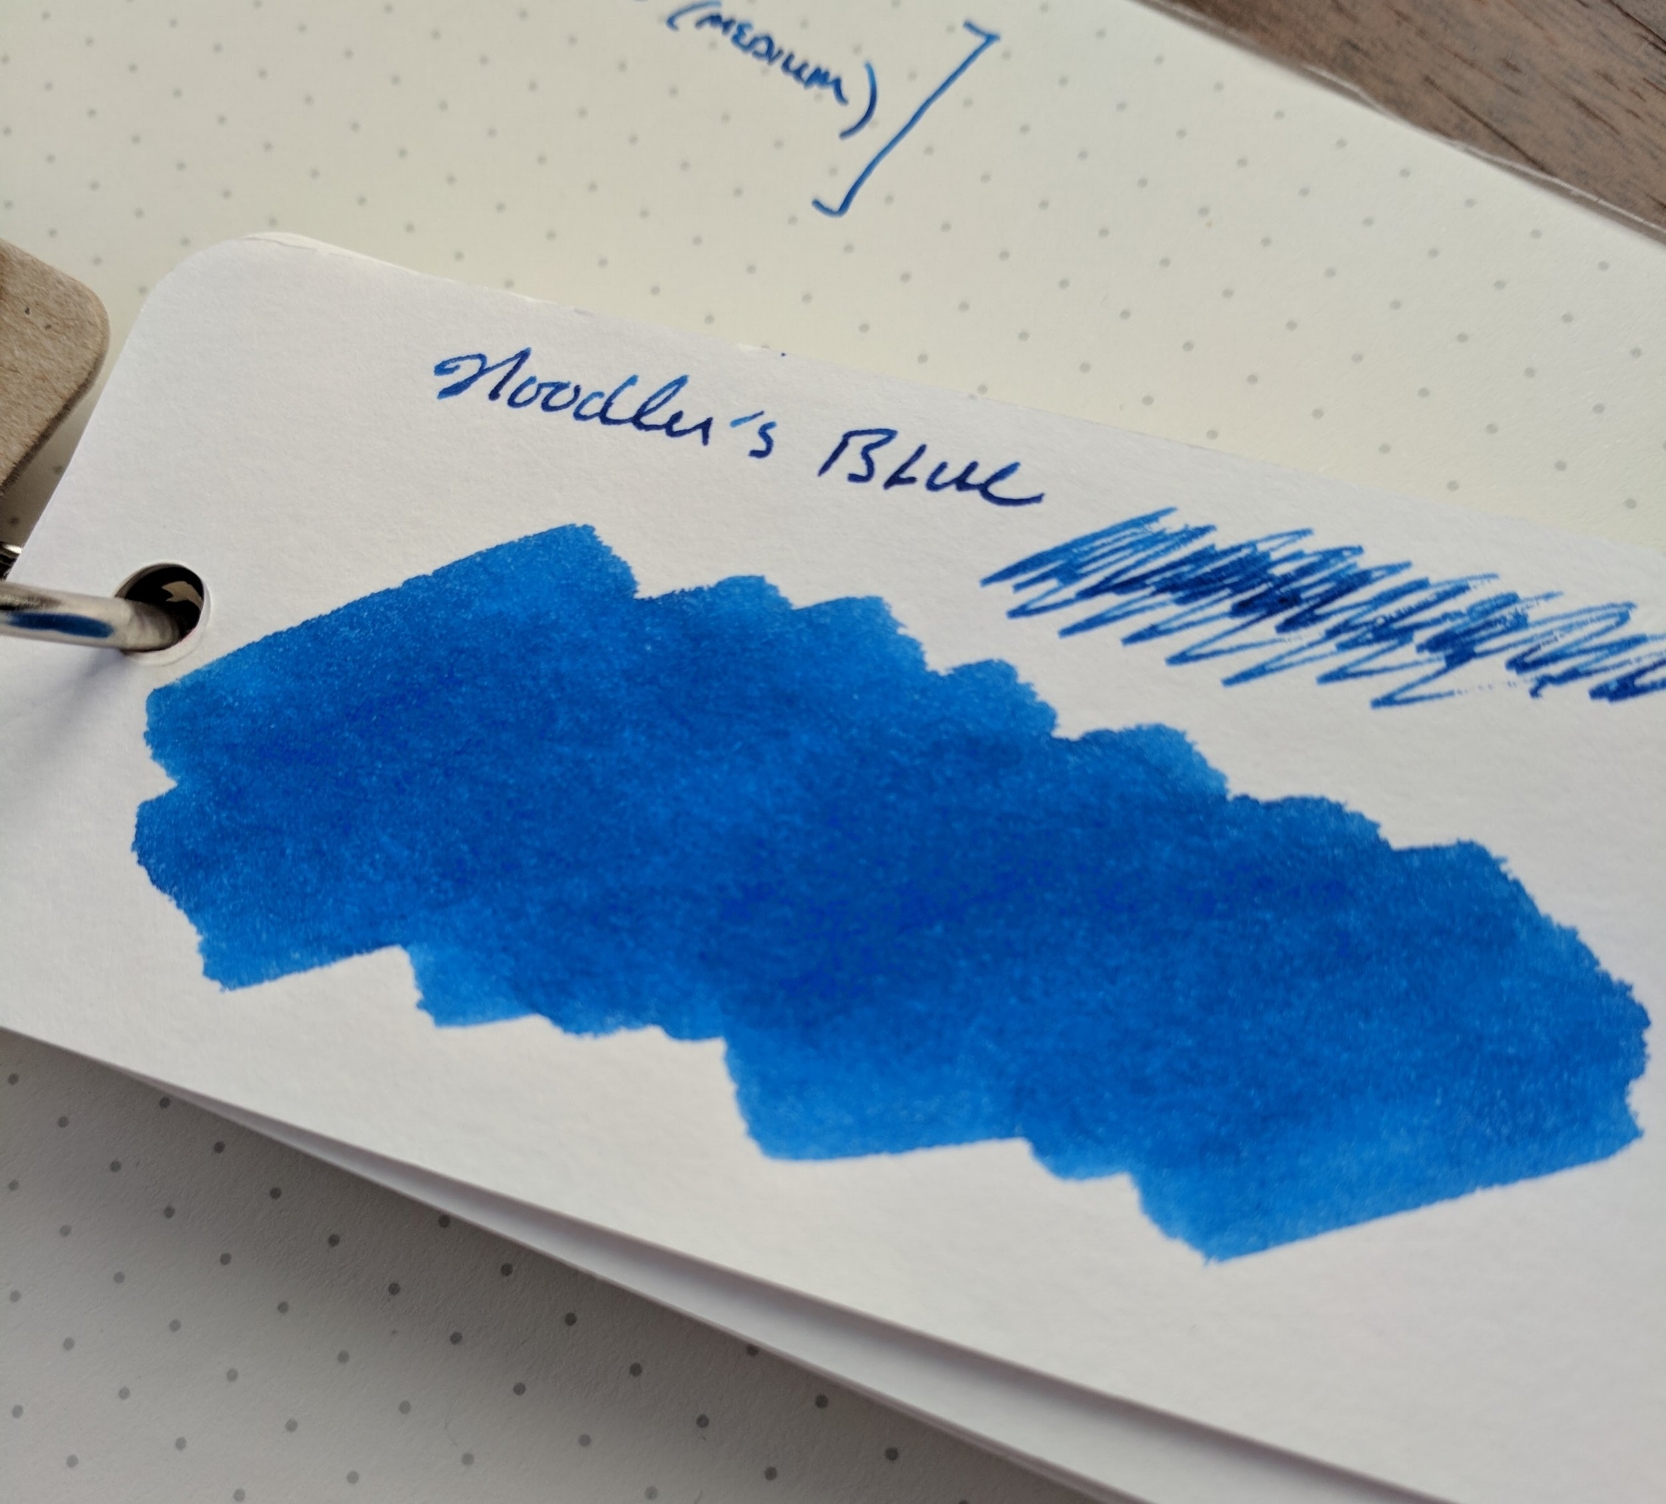 Noodlers Inks are different! – FOUNTAIN PEN INK ART